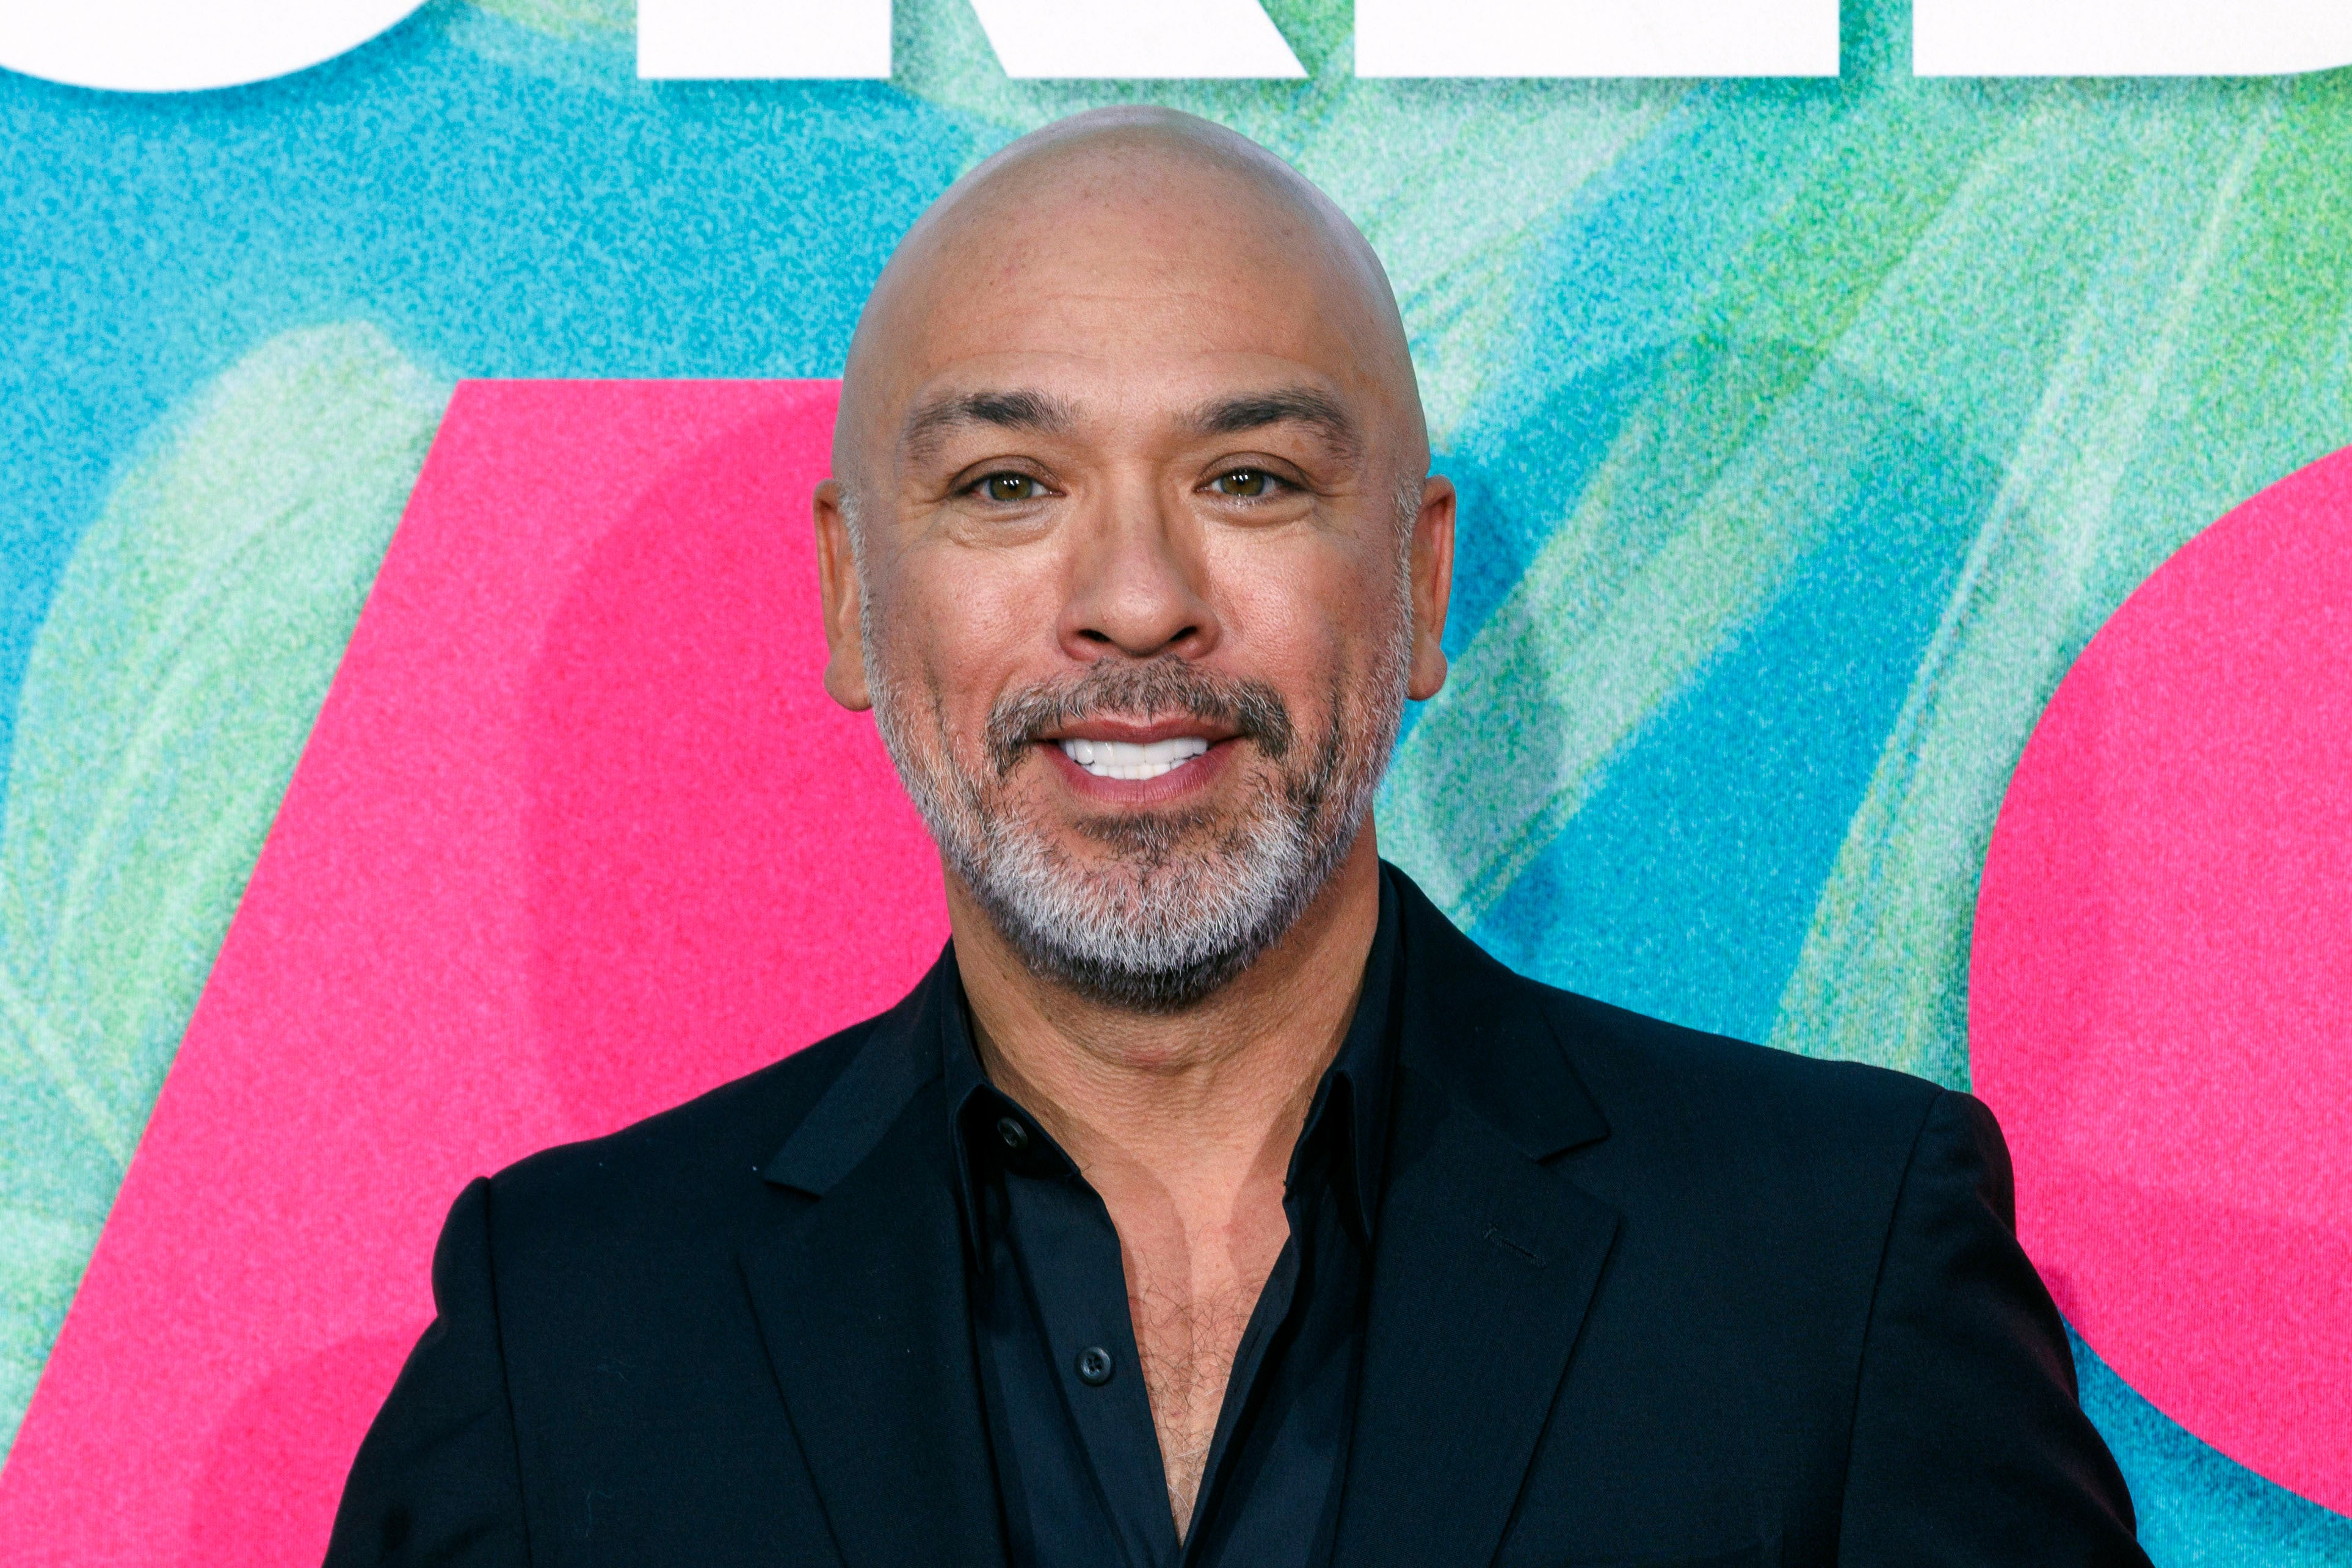 Jo Koy attends the ‘Easter Sunday’ premiere in 2022